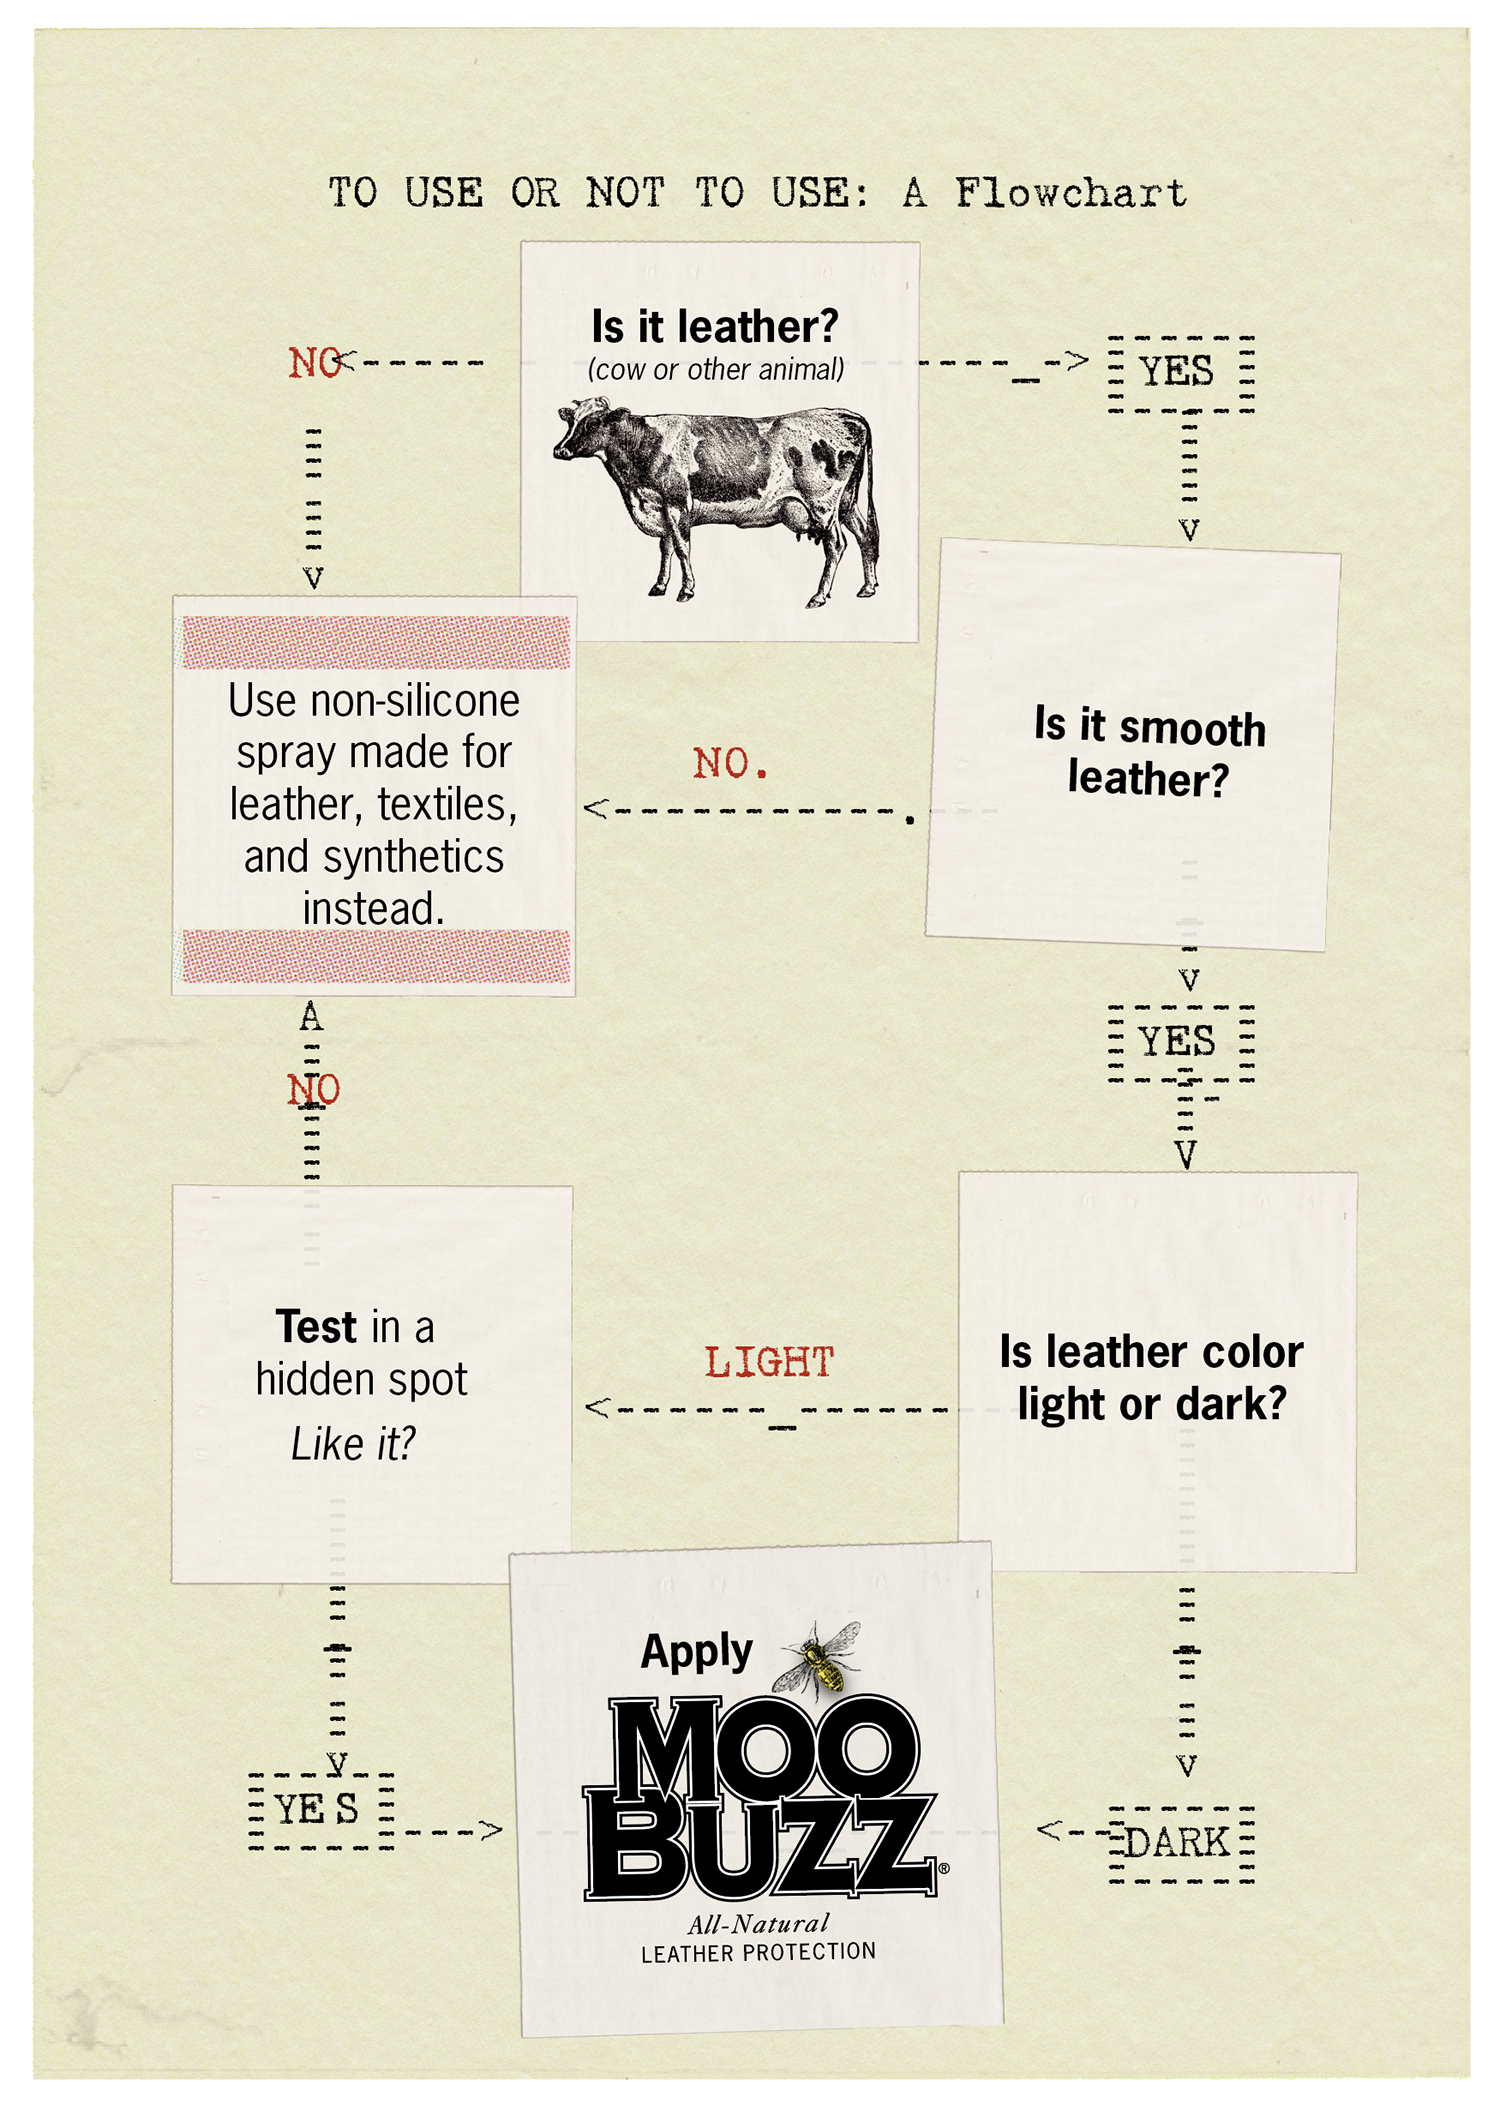 visual diagram of when to use moobuzz. smooth dark leather always "yes" 